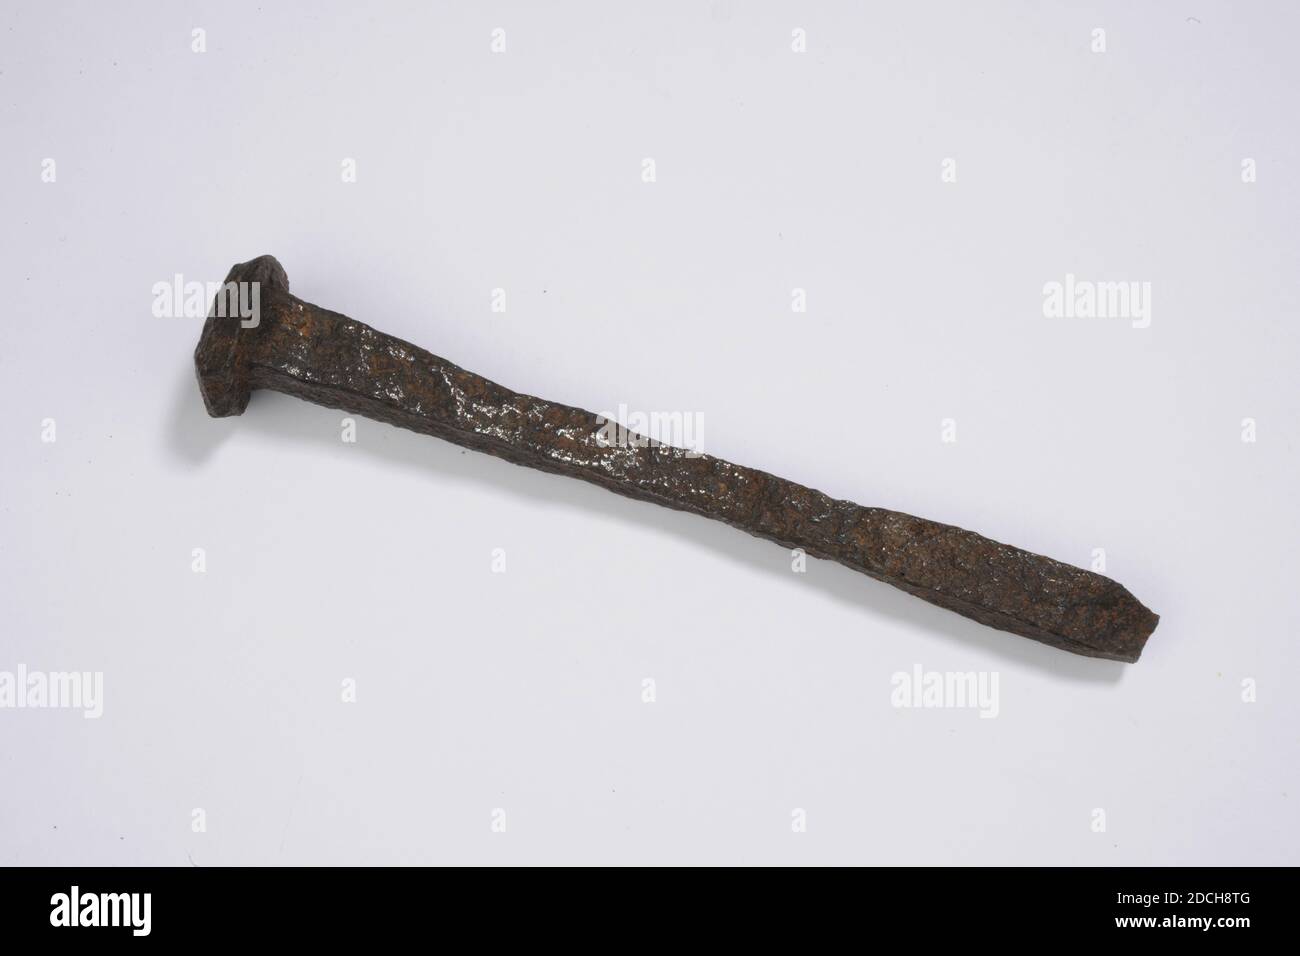 nail fastener anonymous 16th or 17th century forged general 228 x 27 x 25cm 228 x 27 x 25mm forged iron nail with a square head and long handle found at the demolition of the roof of the university library 1882 2DCH8TG